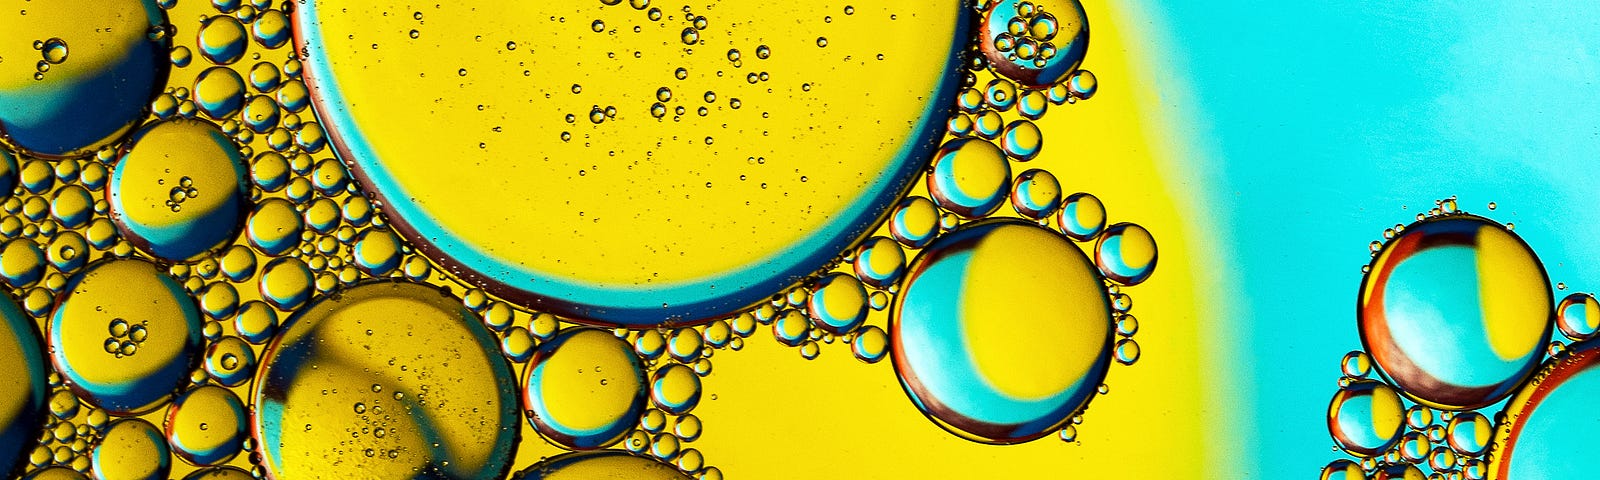 Olive oil bubbles in close-up, on a yellow and blue background. A recent study shows an association between olive oil consumption and longer life.